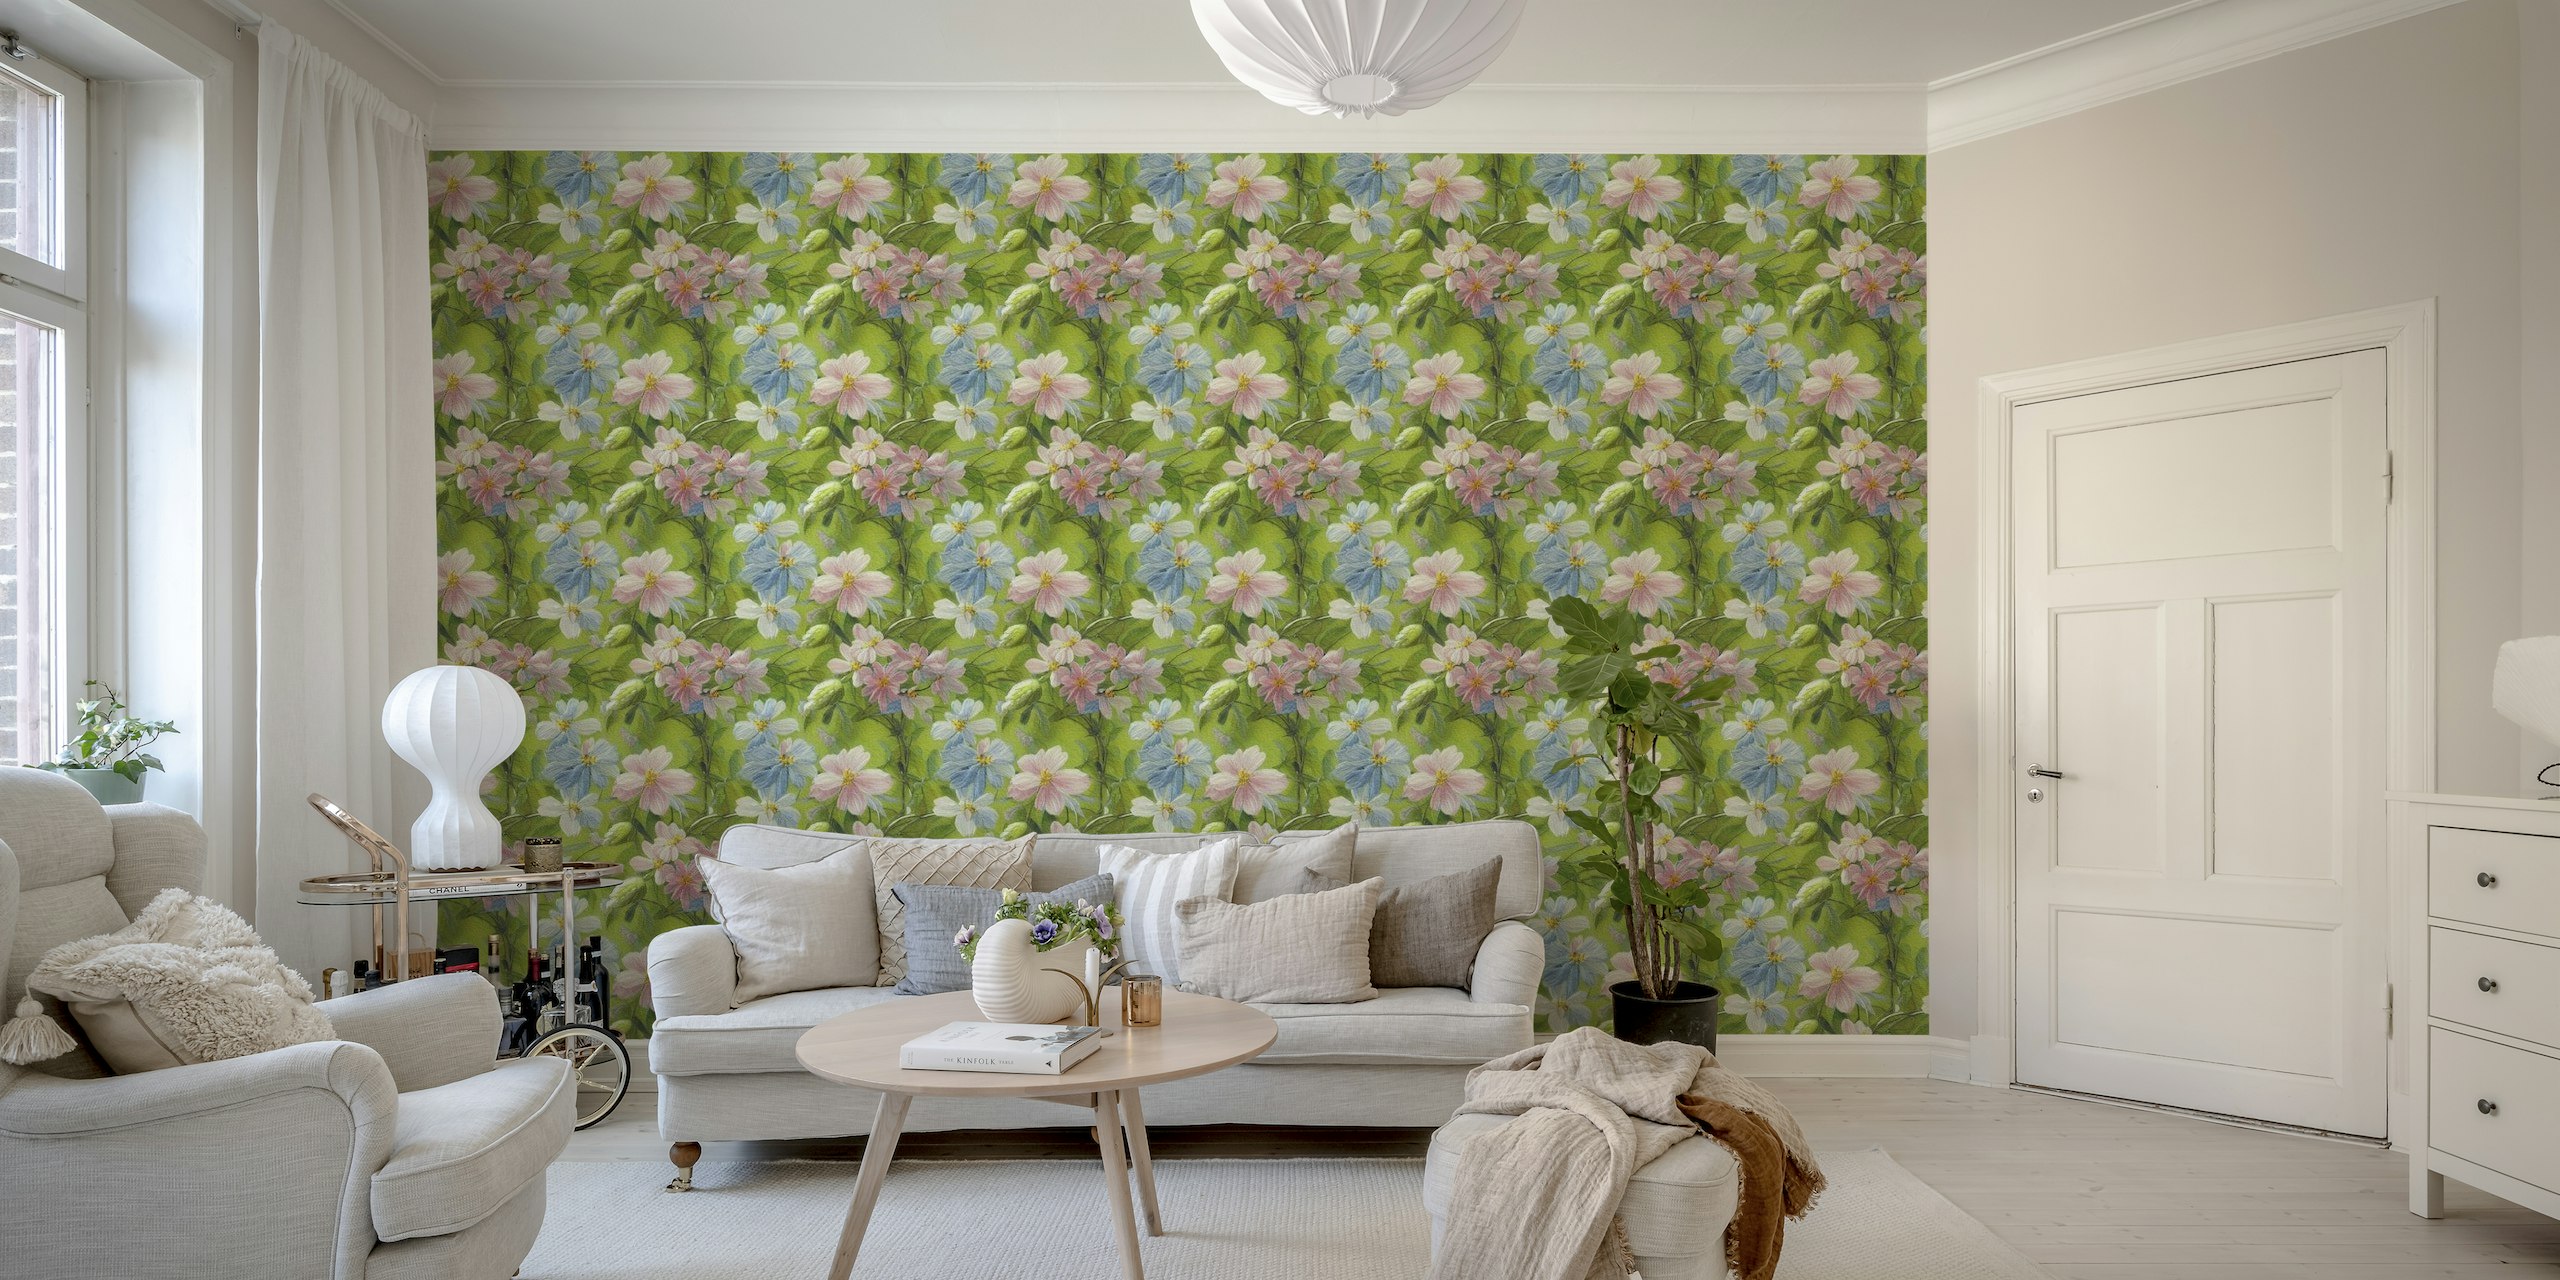 Apple Blossom in Spring Green wall mural with pink, white, and blue flowers